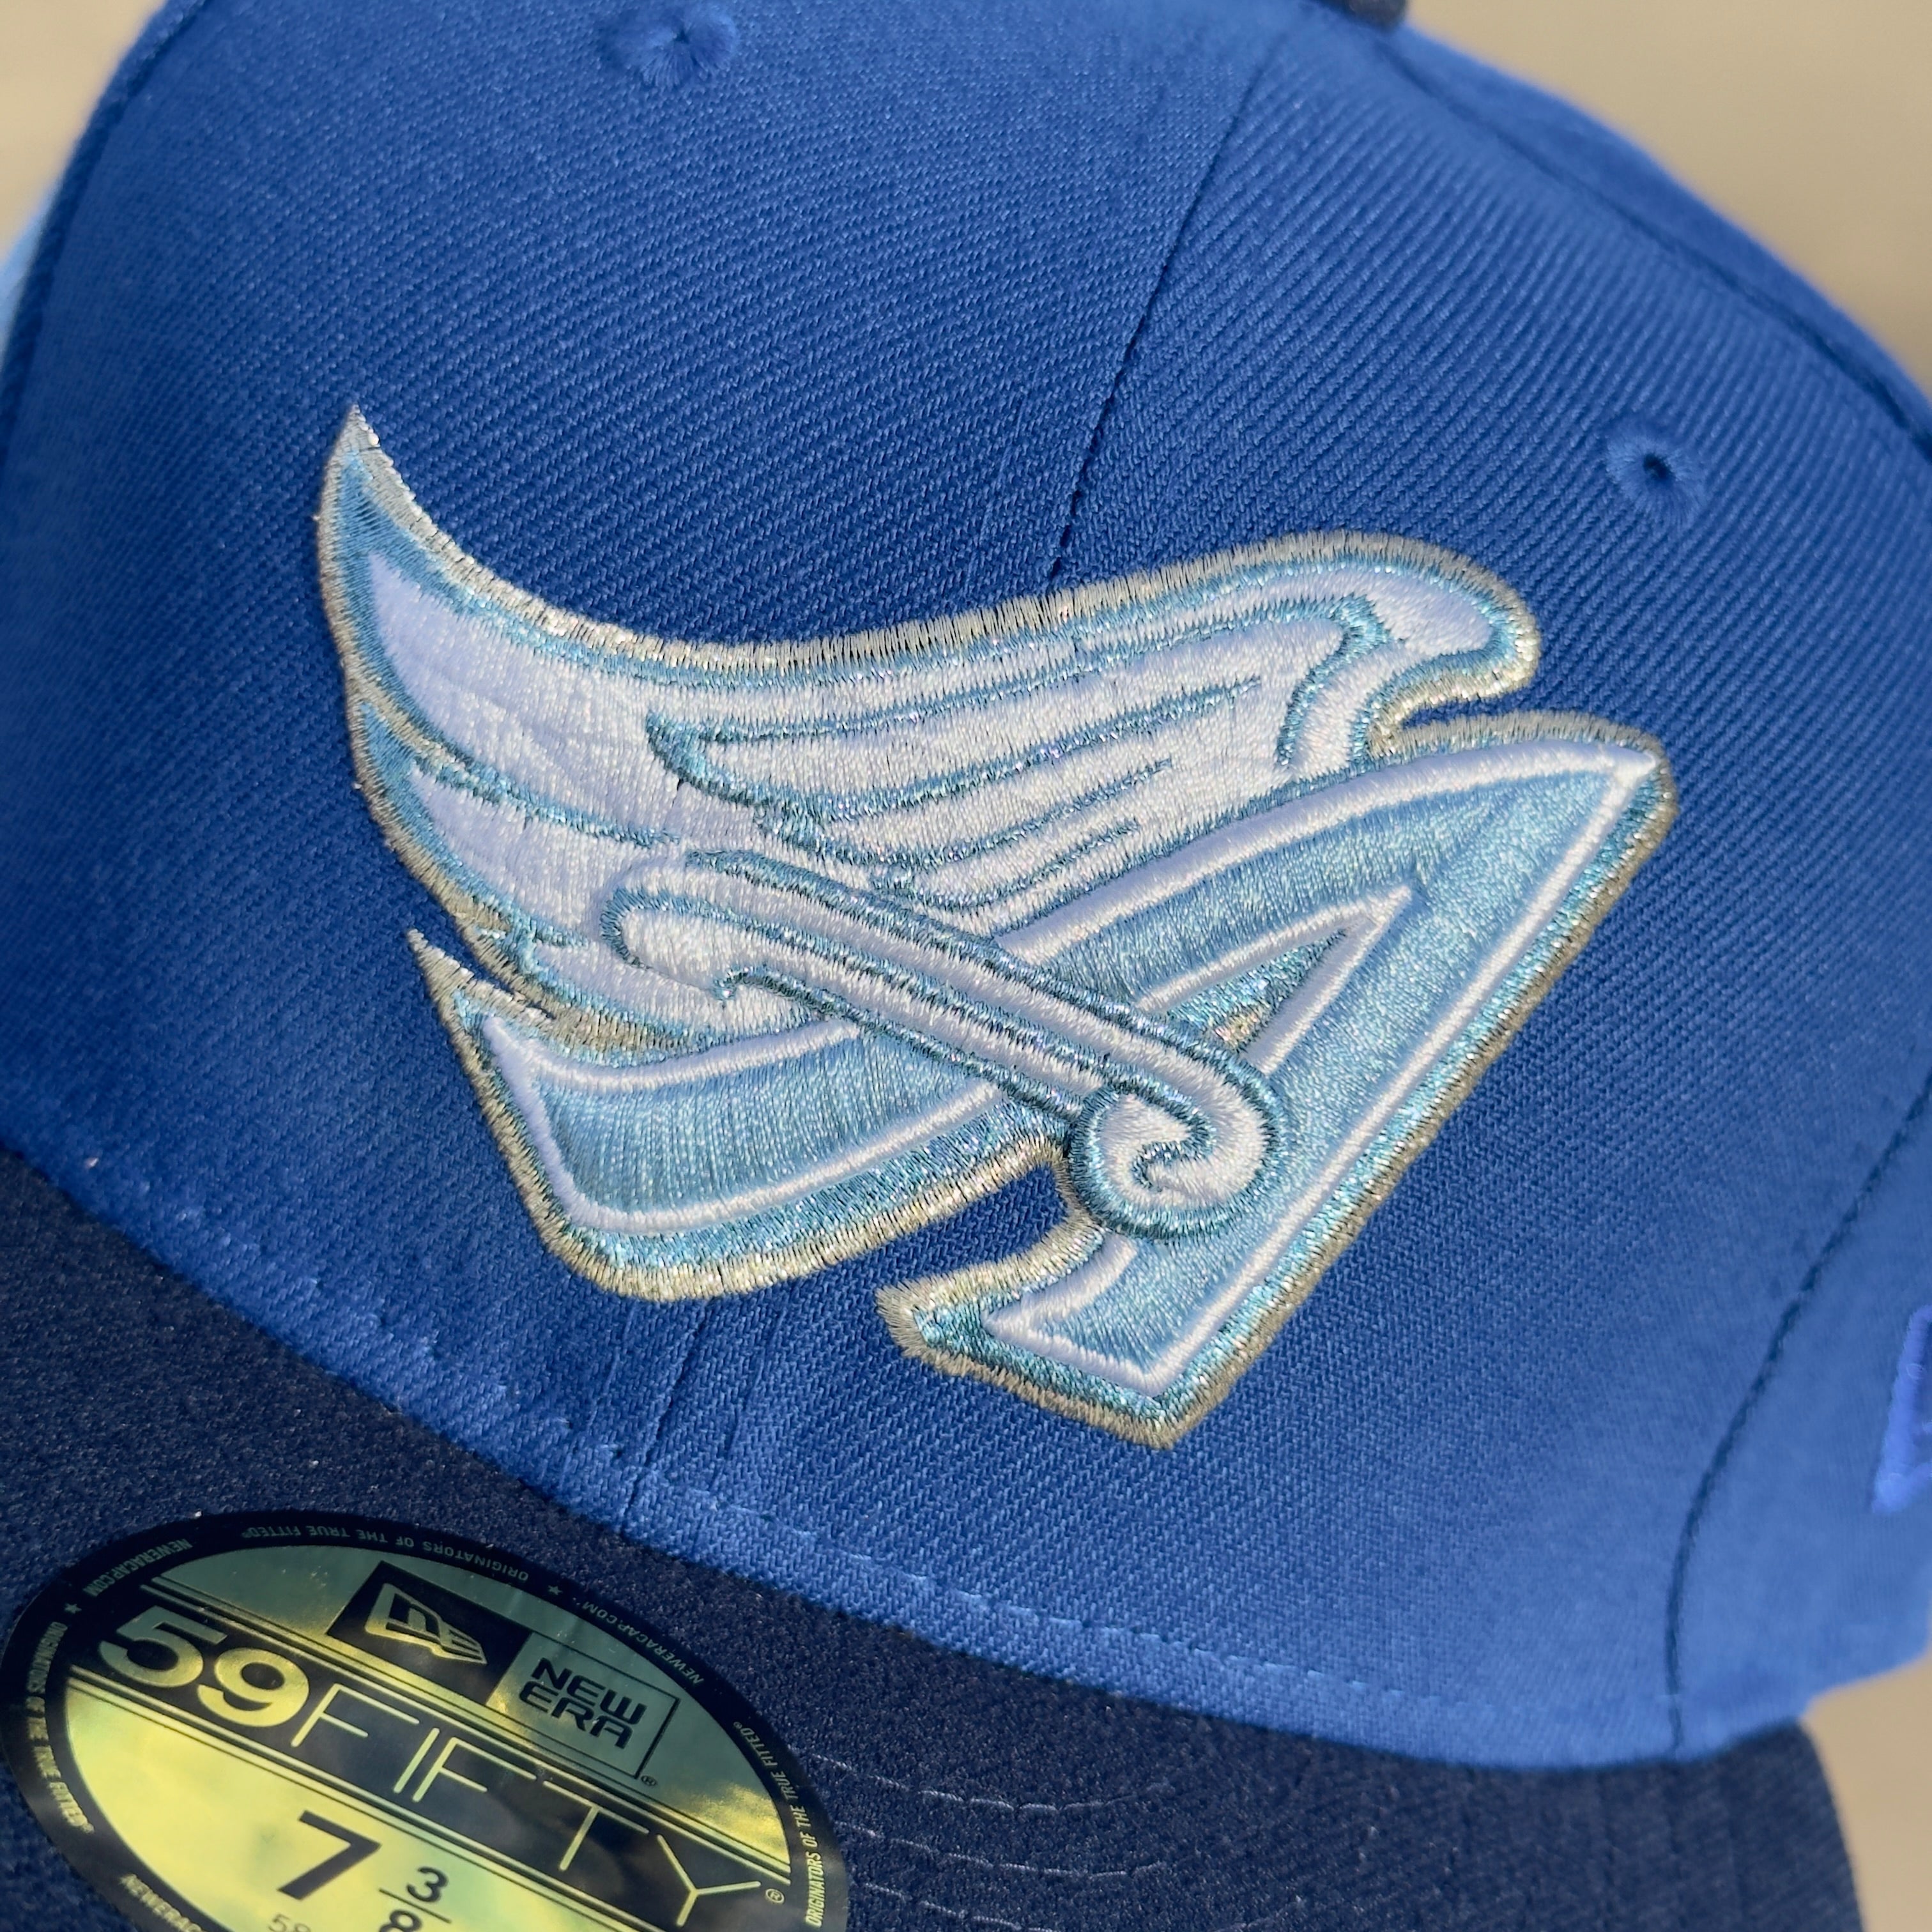 Icy Blue Anaheim Angels 40th Season 59fifty New Era Fitted Cap Hat Sun